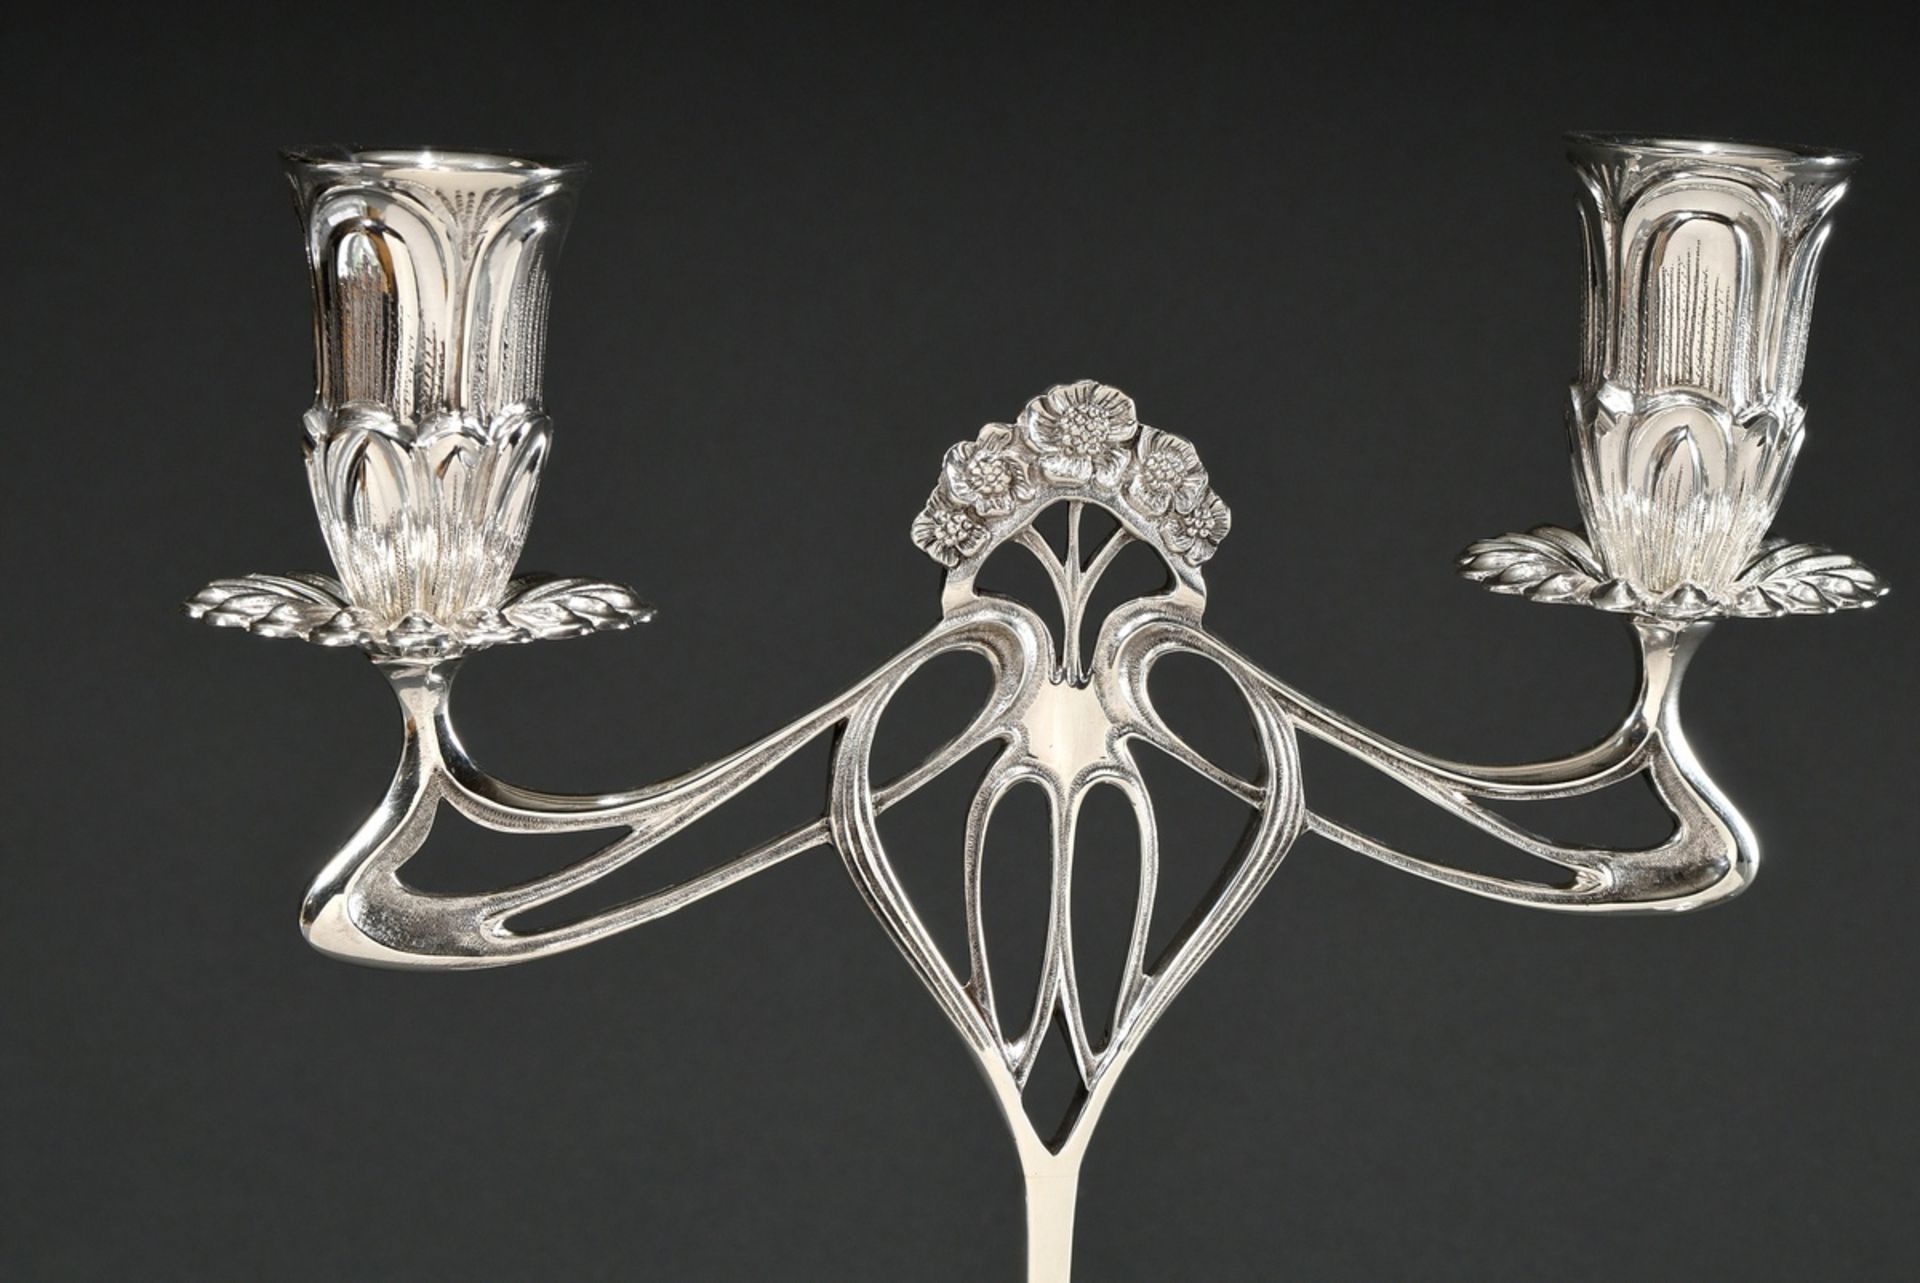 Pair of floral table girdles in art nouveau style with flower spouts and attachments after WMF desi - Image 2 of 4